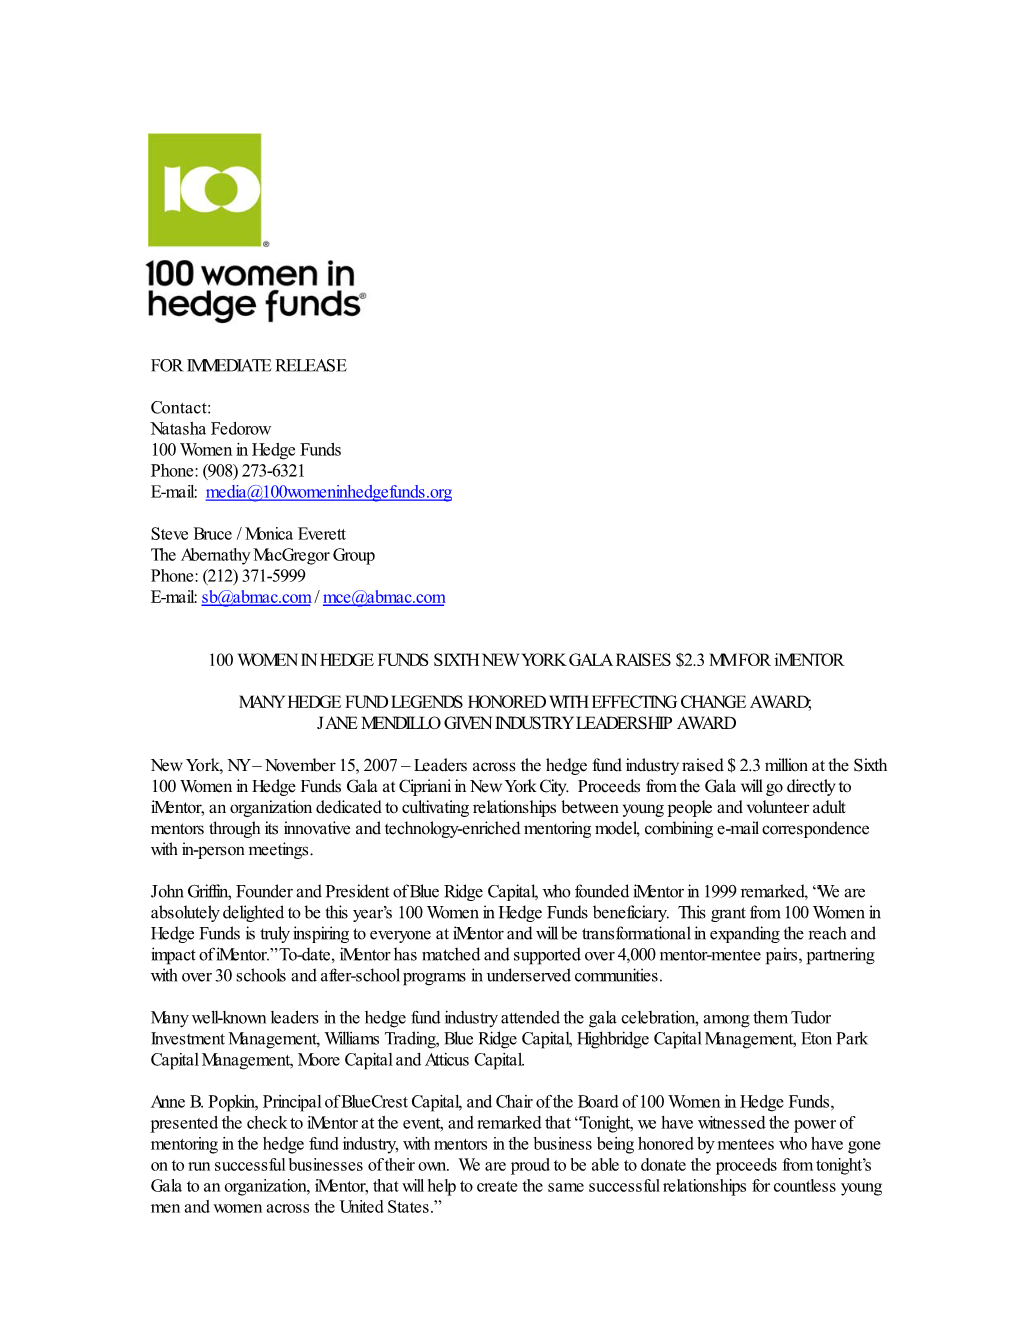 100 Women in Hedge Funds Fourth Annual Gala Raises $2